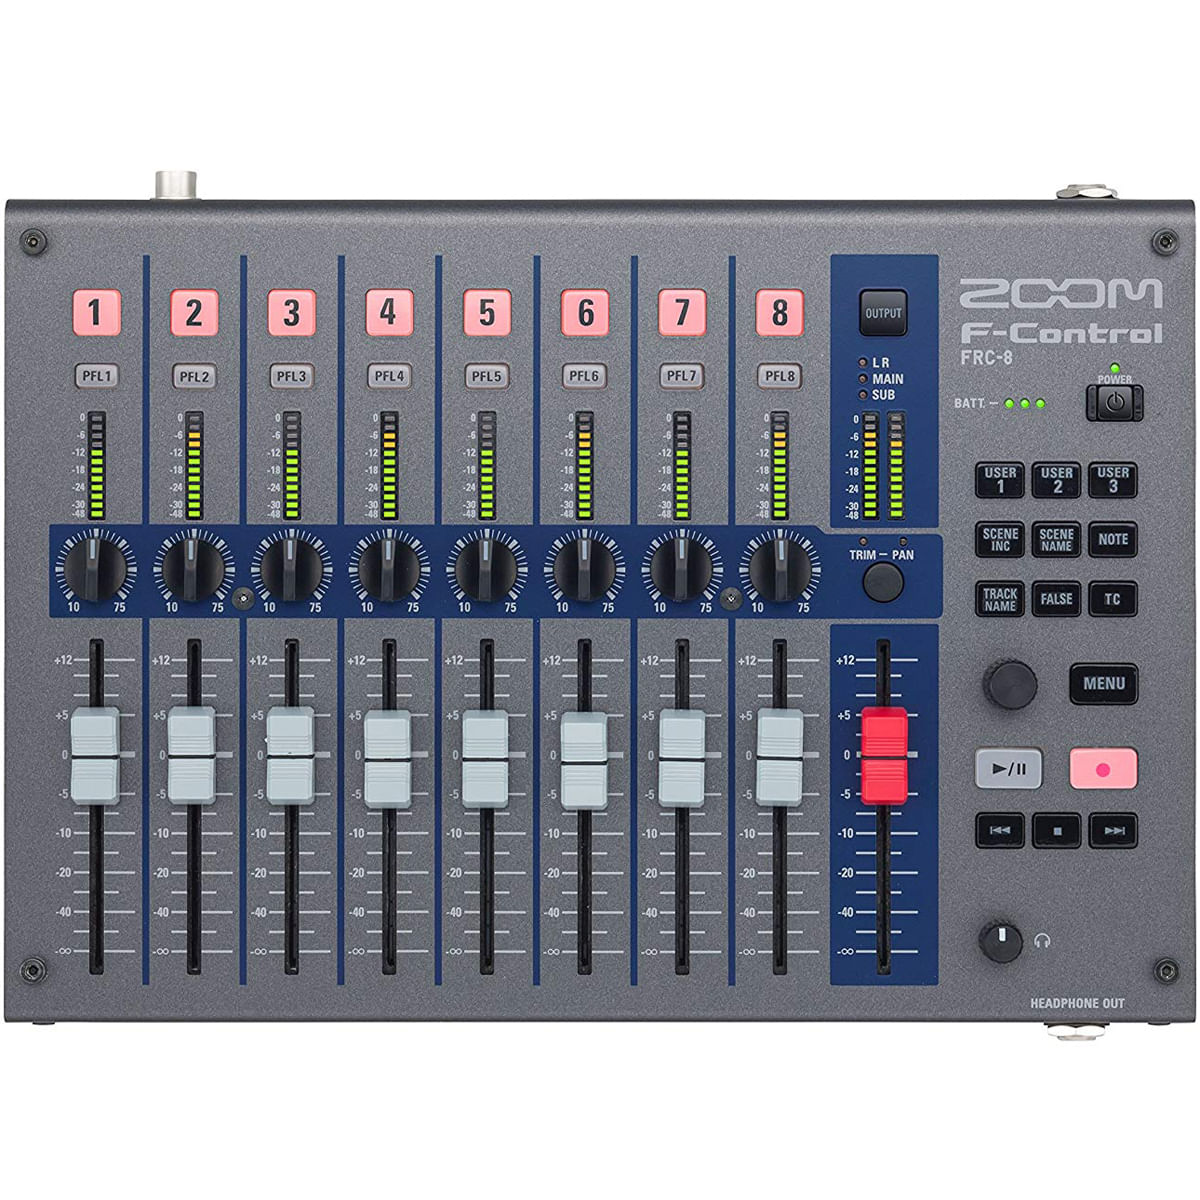 Zoom FRC-8 F-Control Mixing Surface